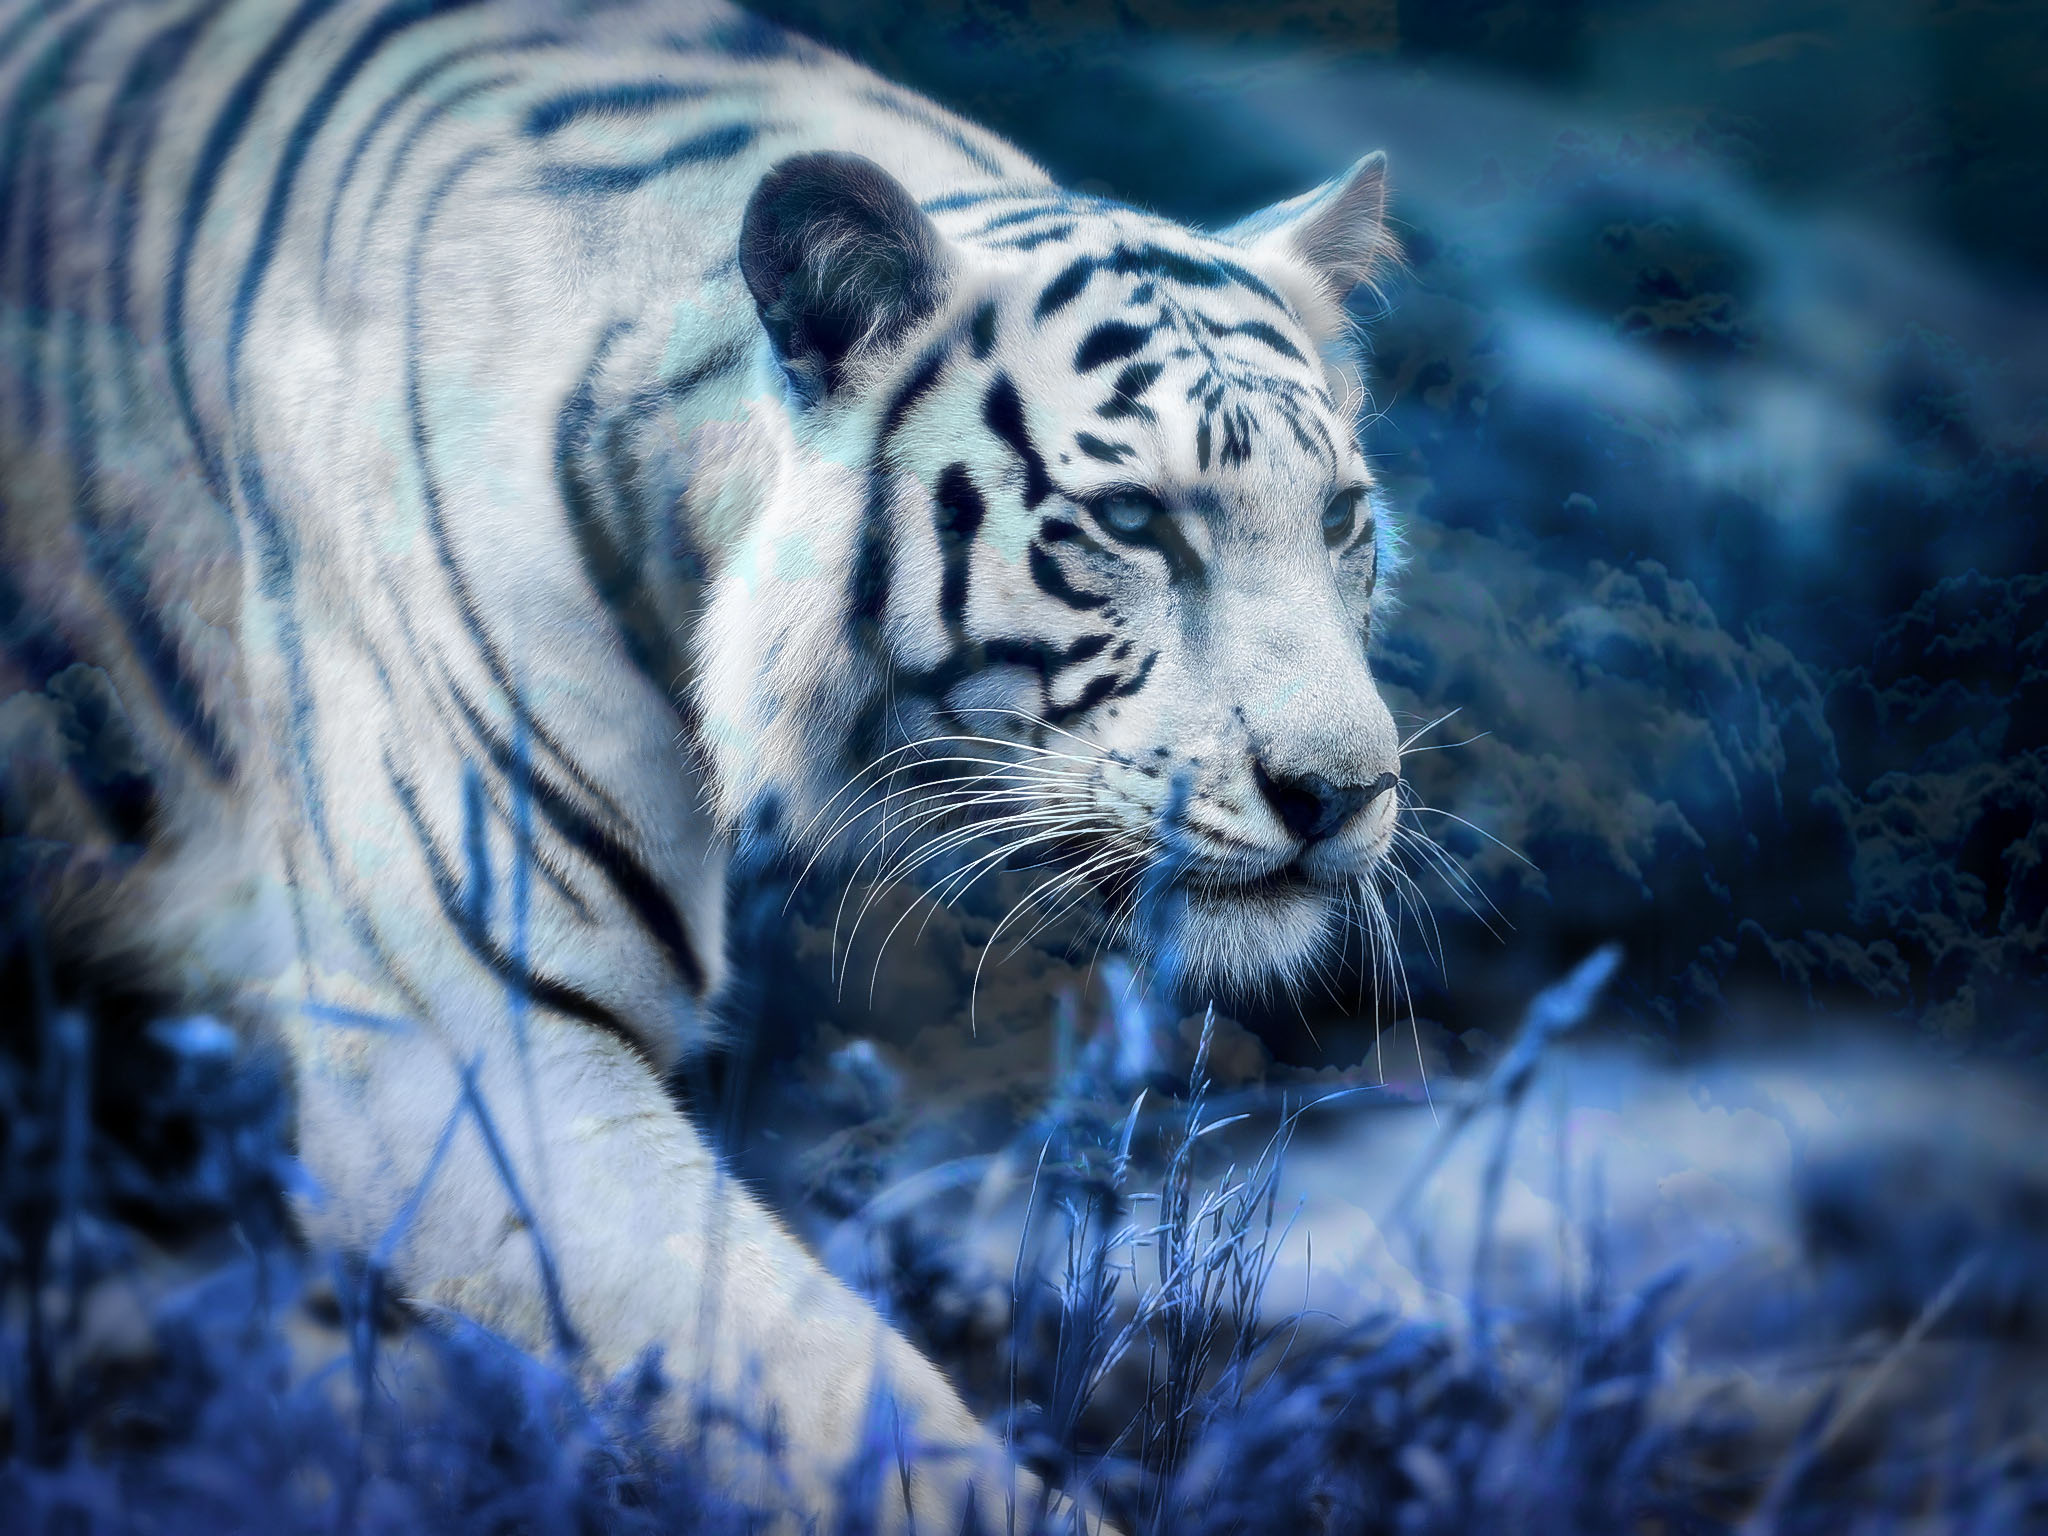 White Tiger Blue Clouds HD Wallpaper Background Image